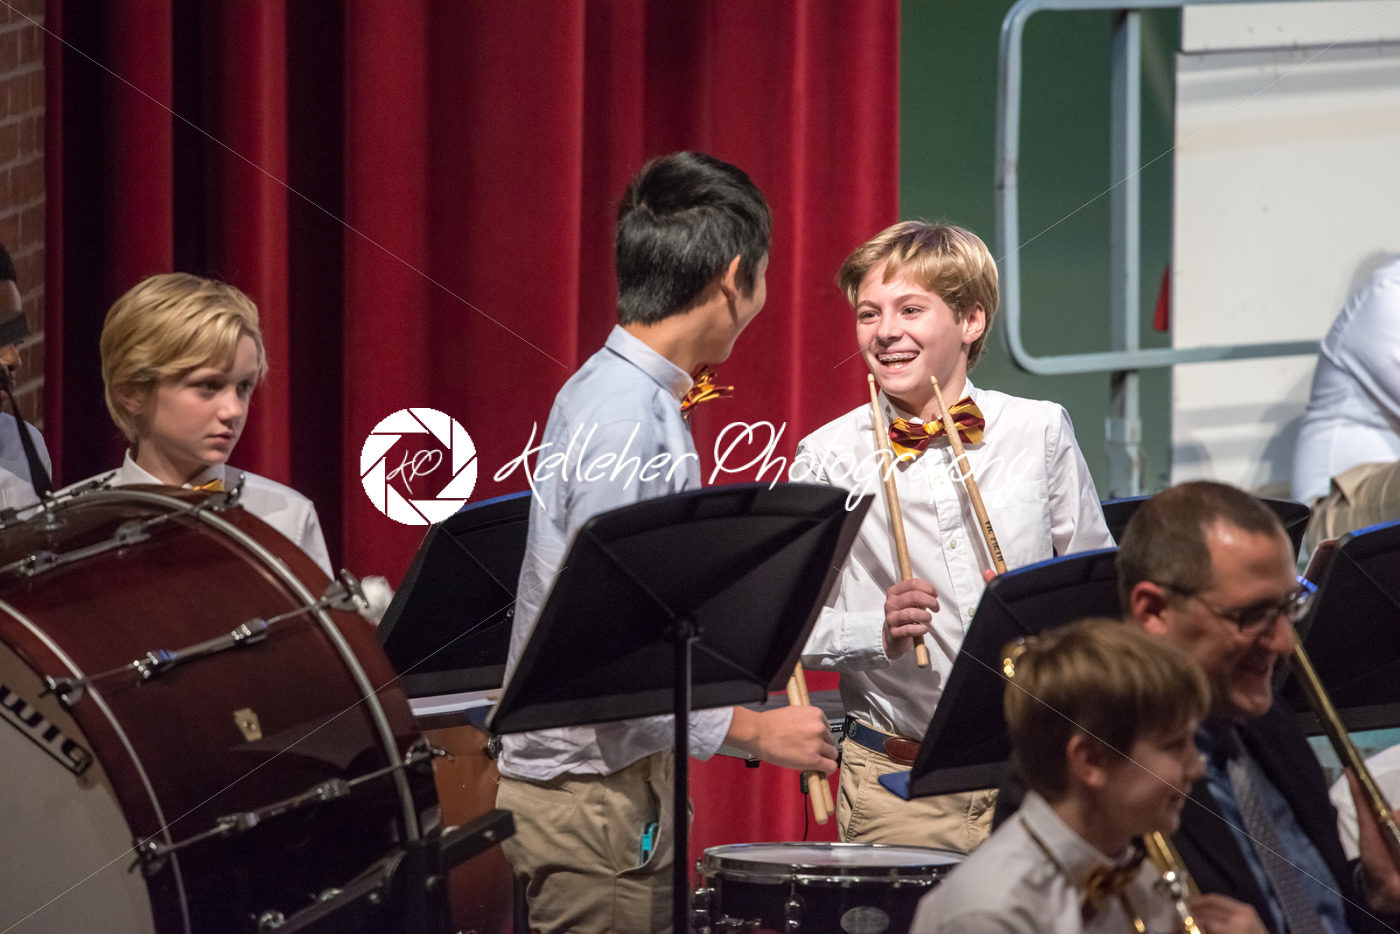 HAVERFORD, PA – DECEMBER 11: Winter Concert at The Haverford School - Kelleher Photography Store